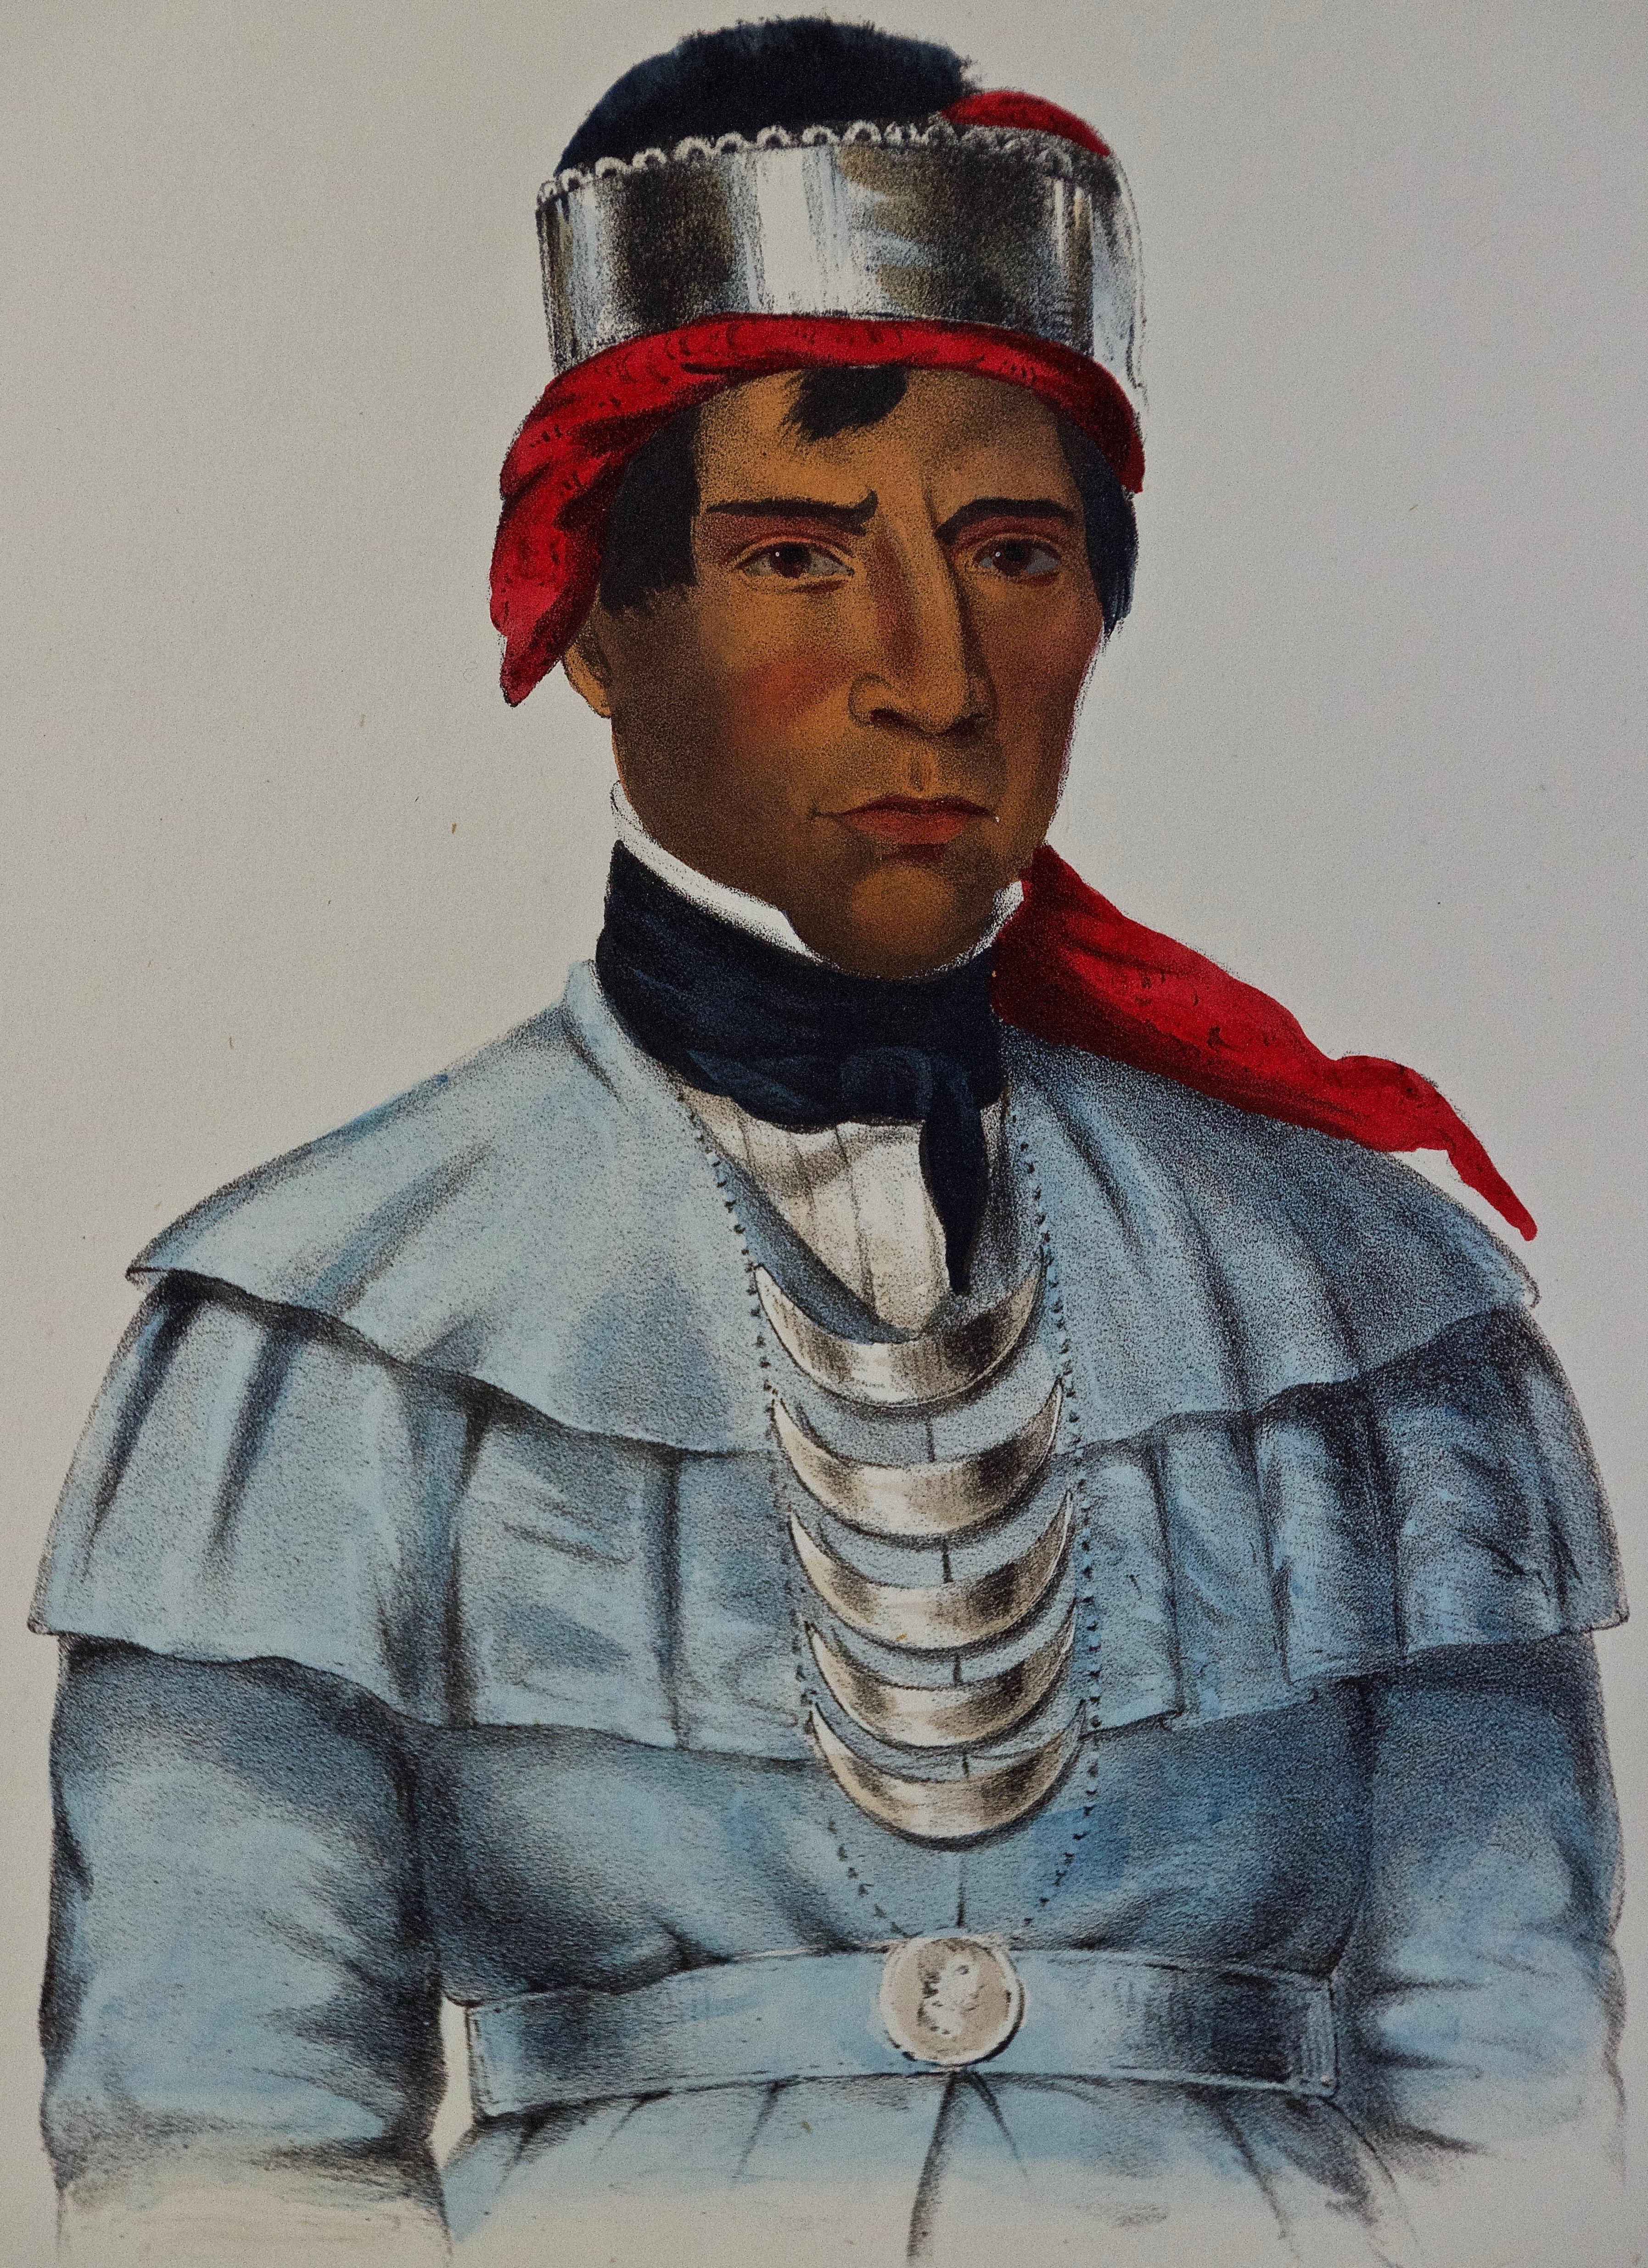 This is an original 19th century hand colored McKenney and Hall engraving of a Native American entitled 